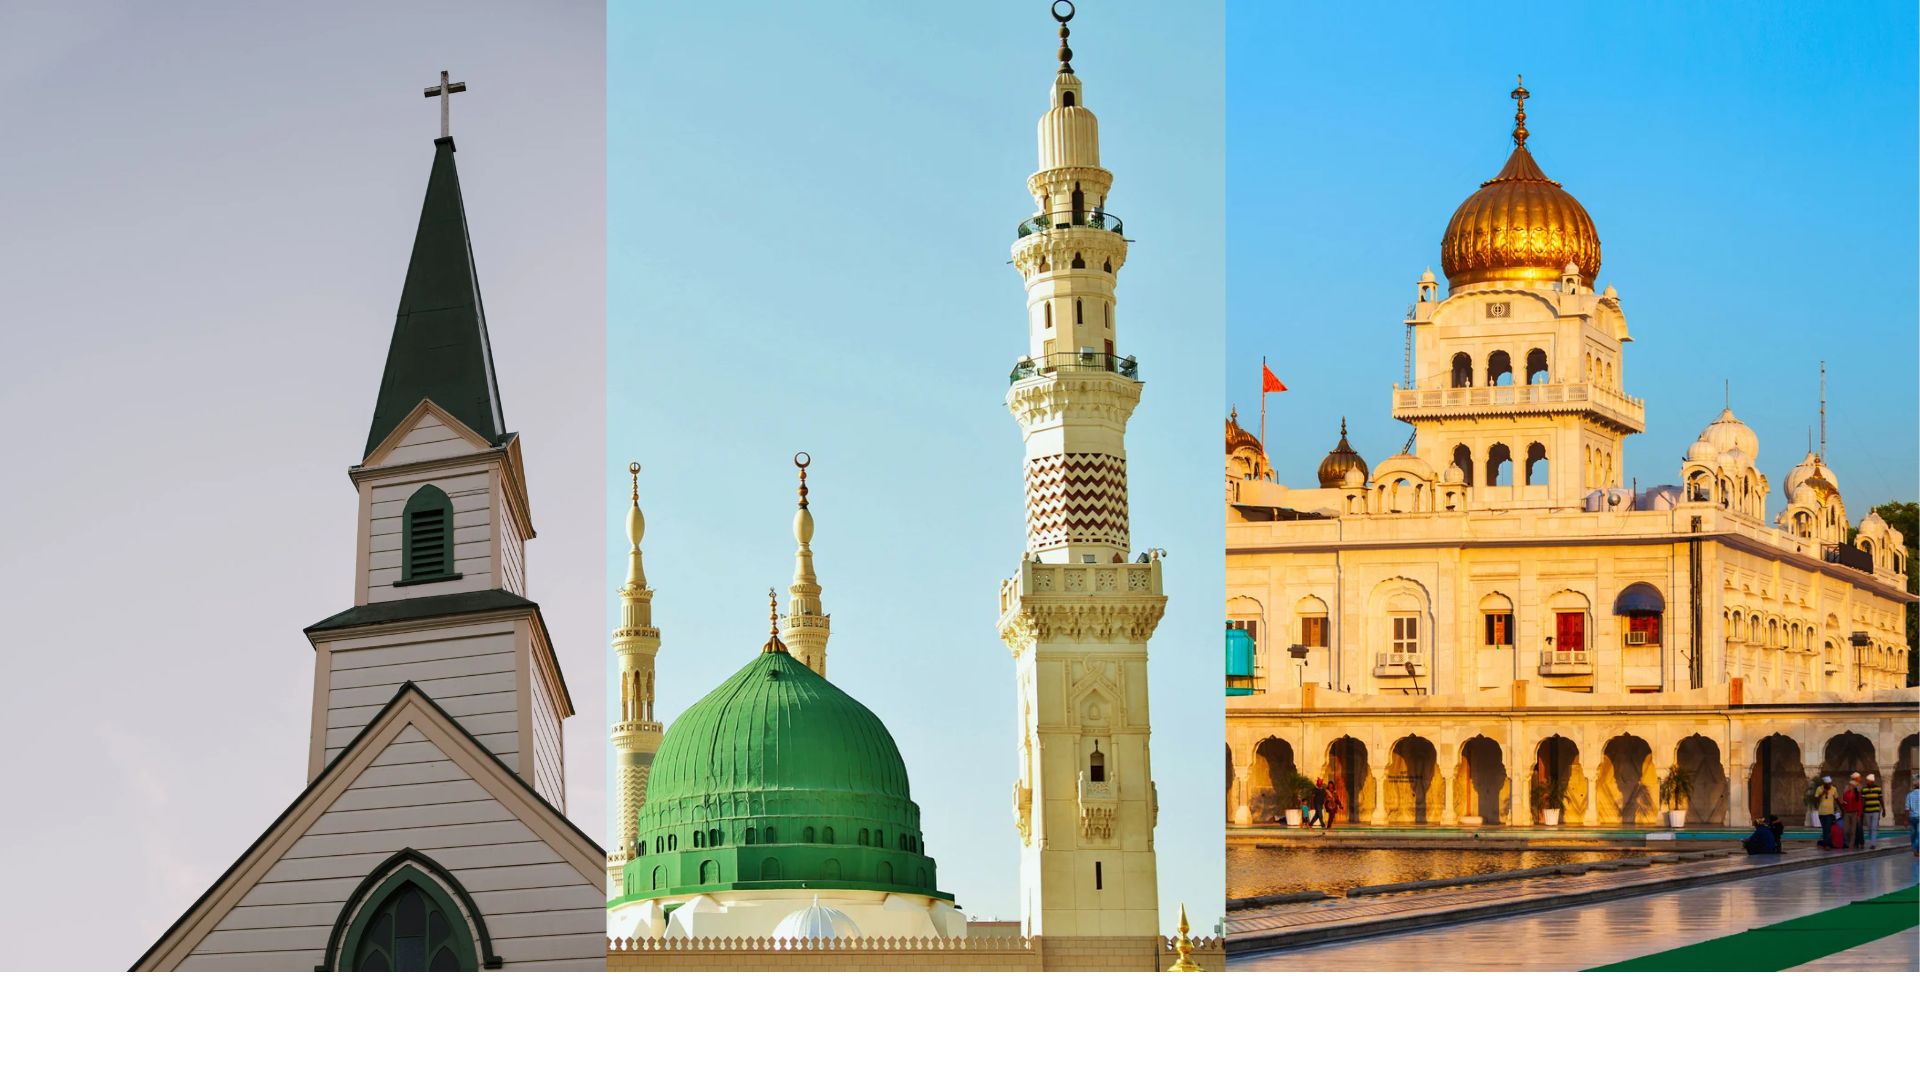 Places of worship is one of the industries where Eazy Return Provides pickup services